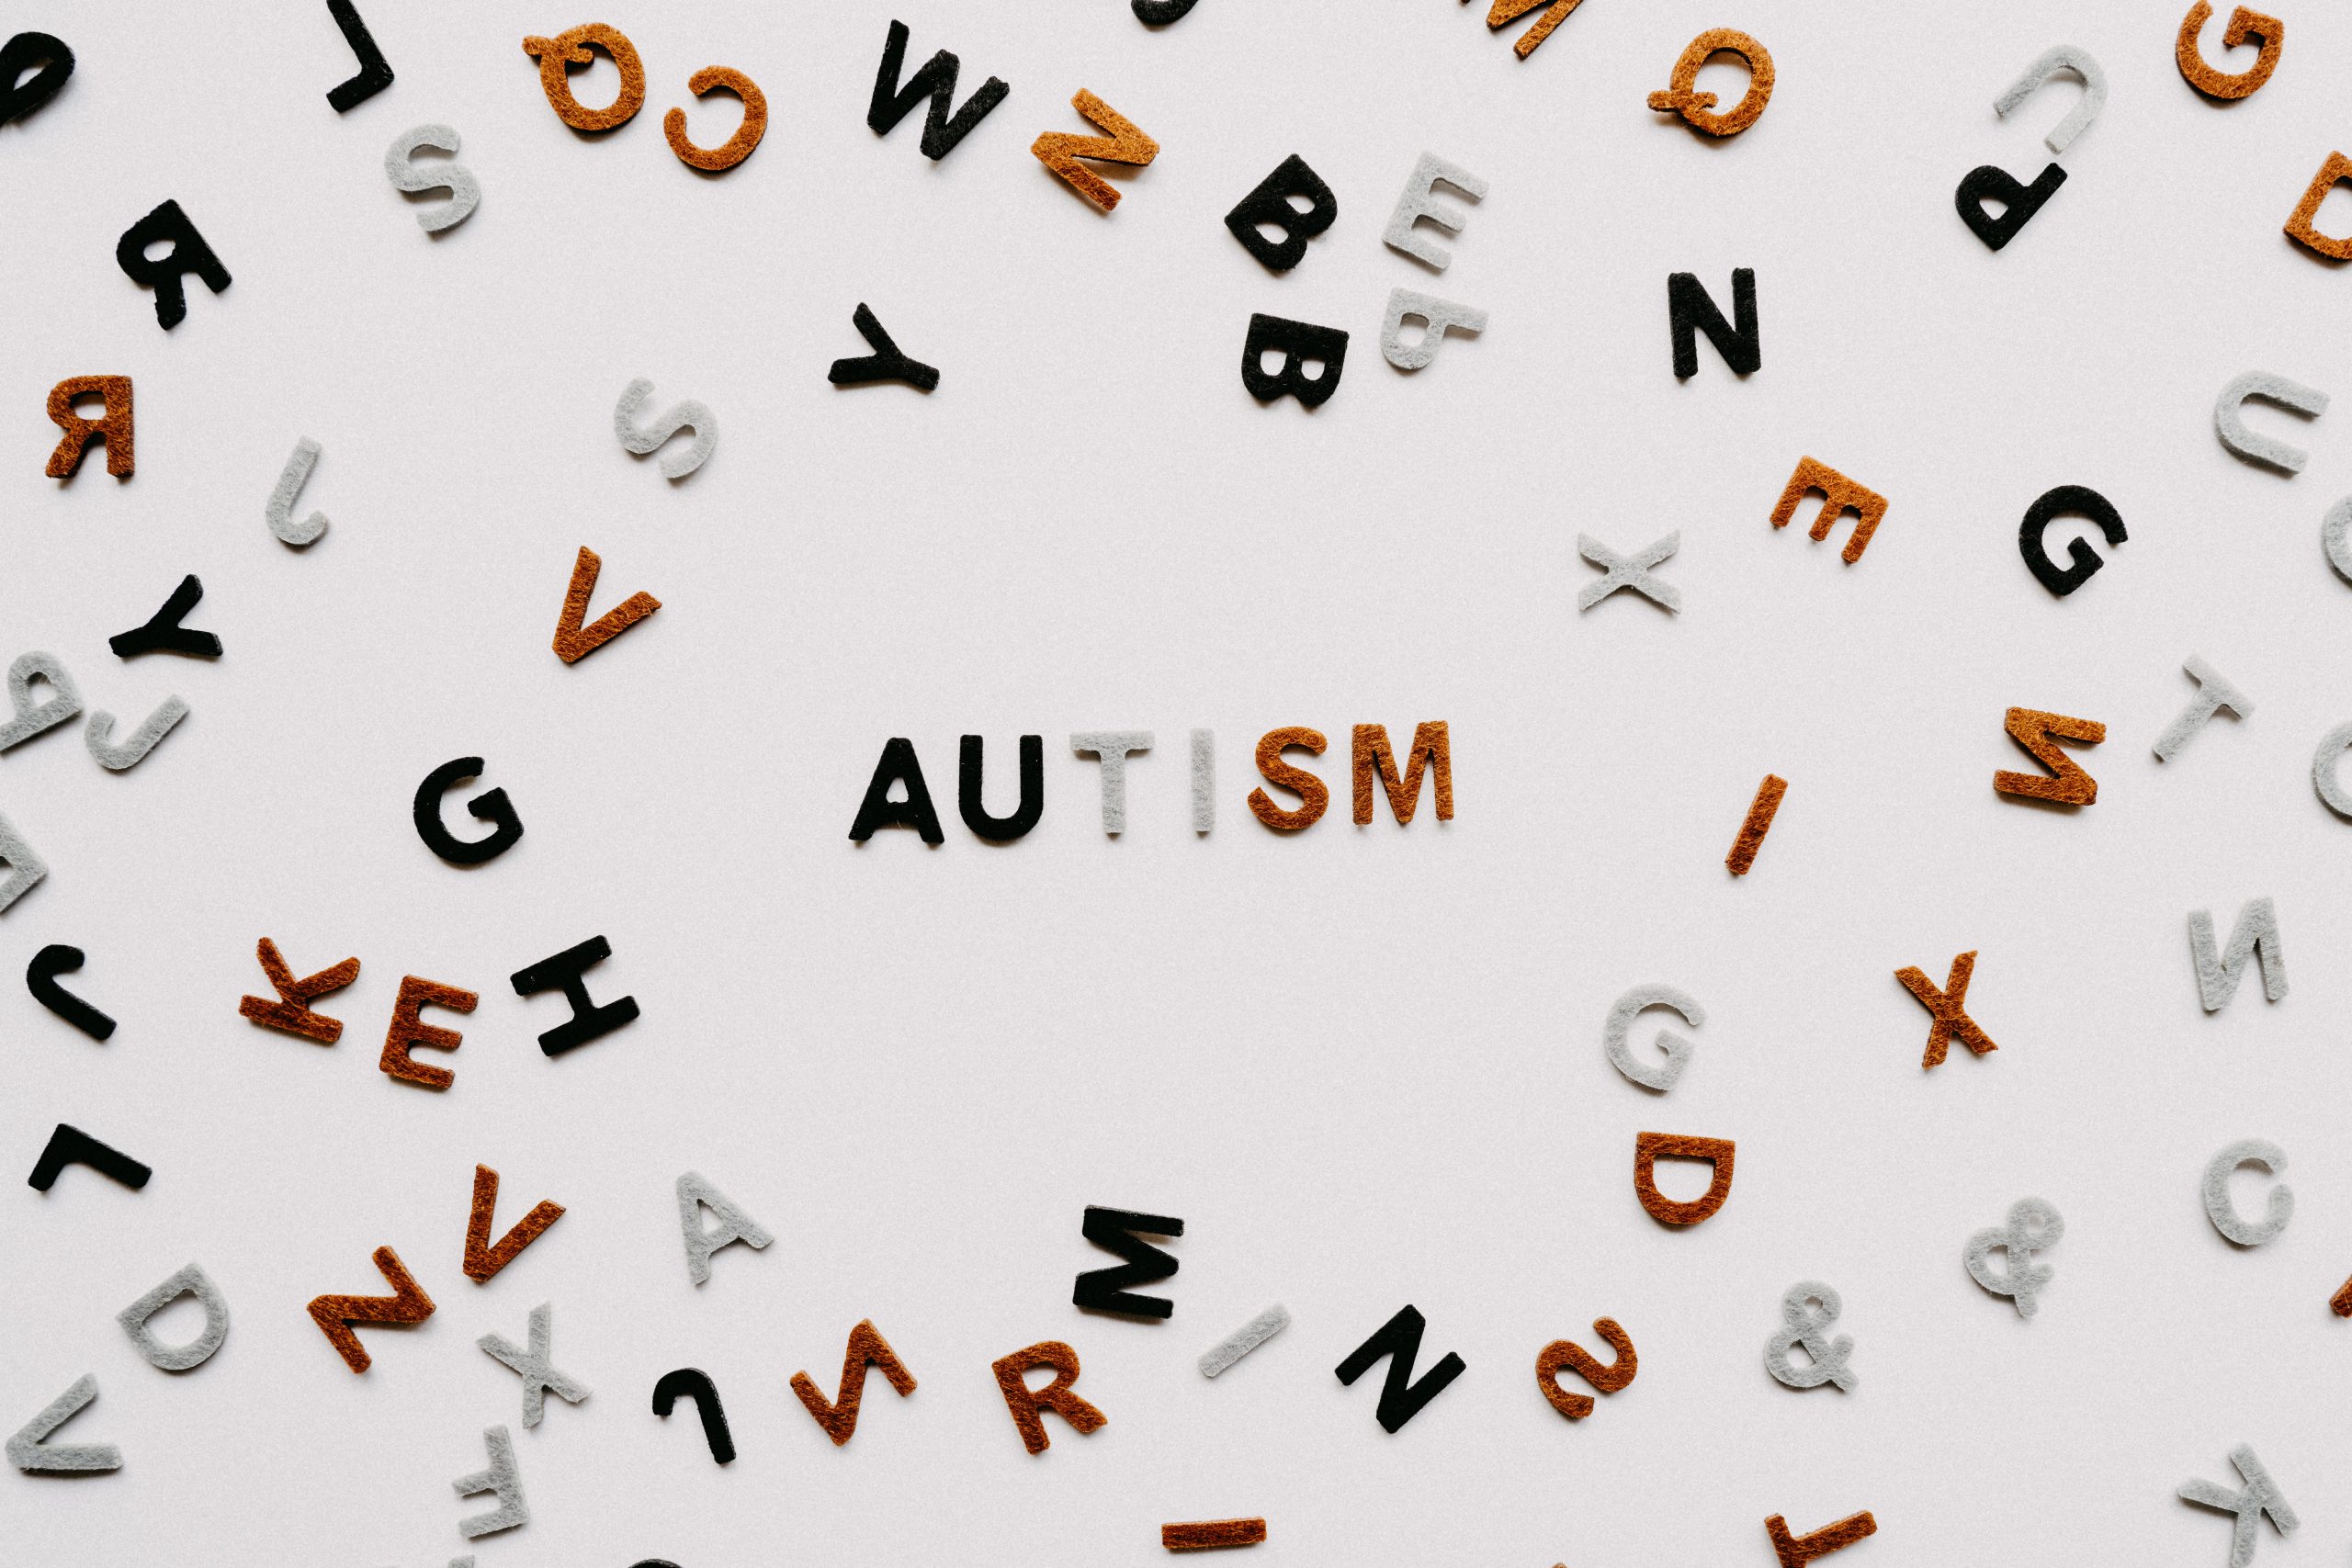 The word is autism is spelt out using letters in the middle of a scattering of other multi-coloured letters